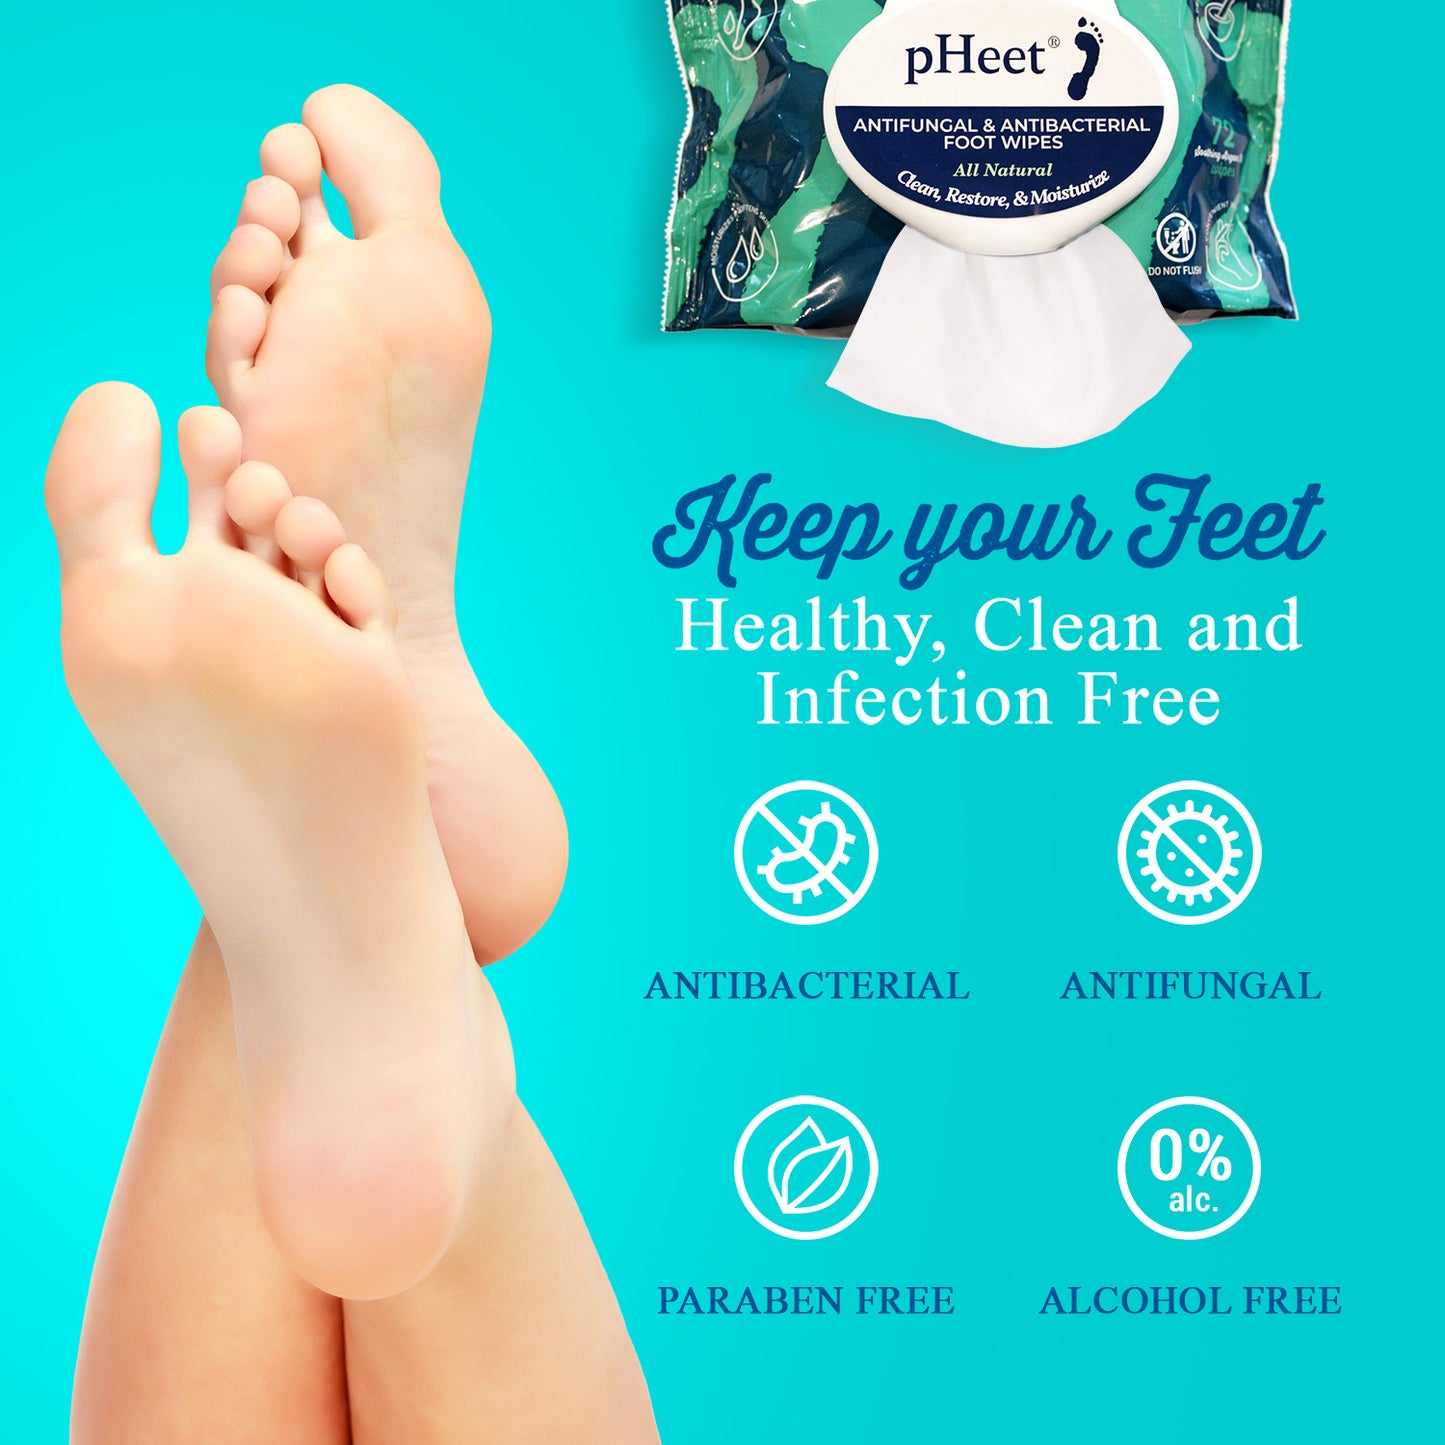 Keep your feet healthy, clean and infection free. It is antibacterial, antifungal, paraben free and alcohol free.